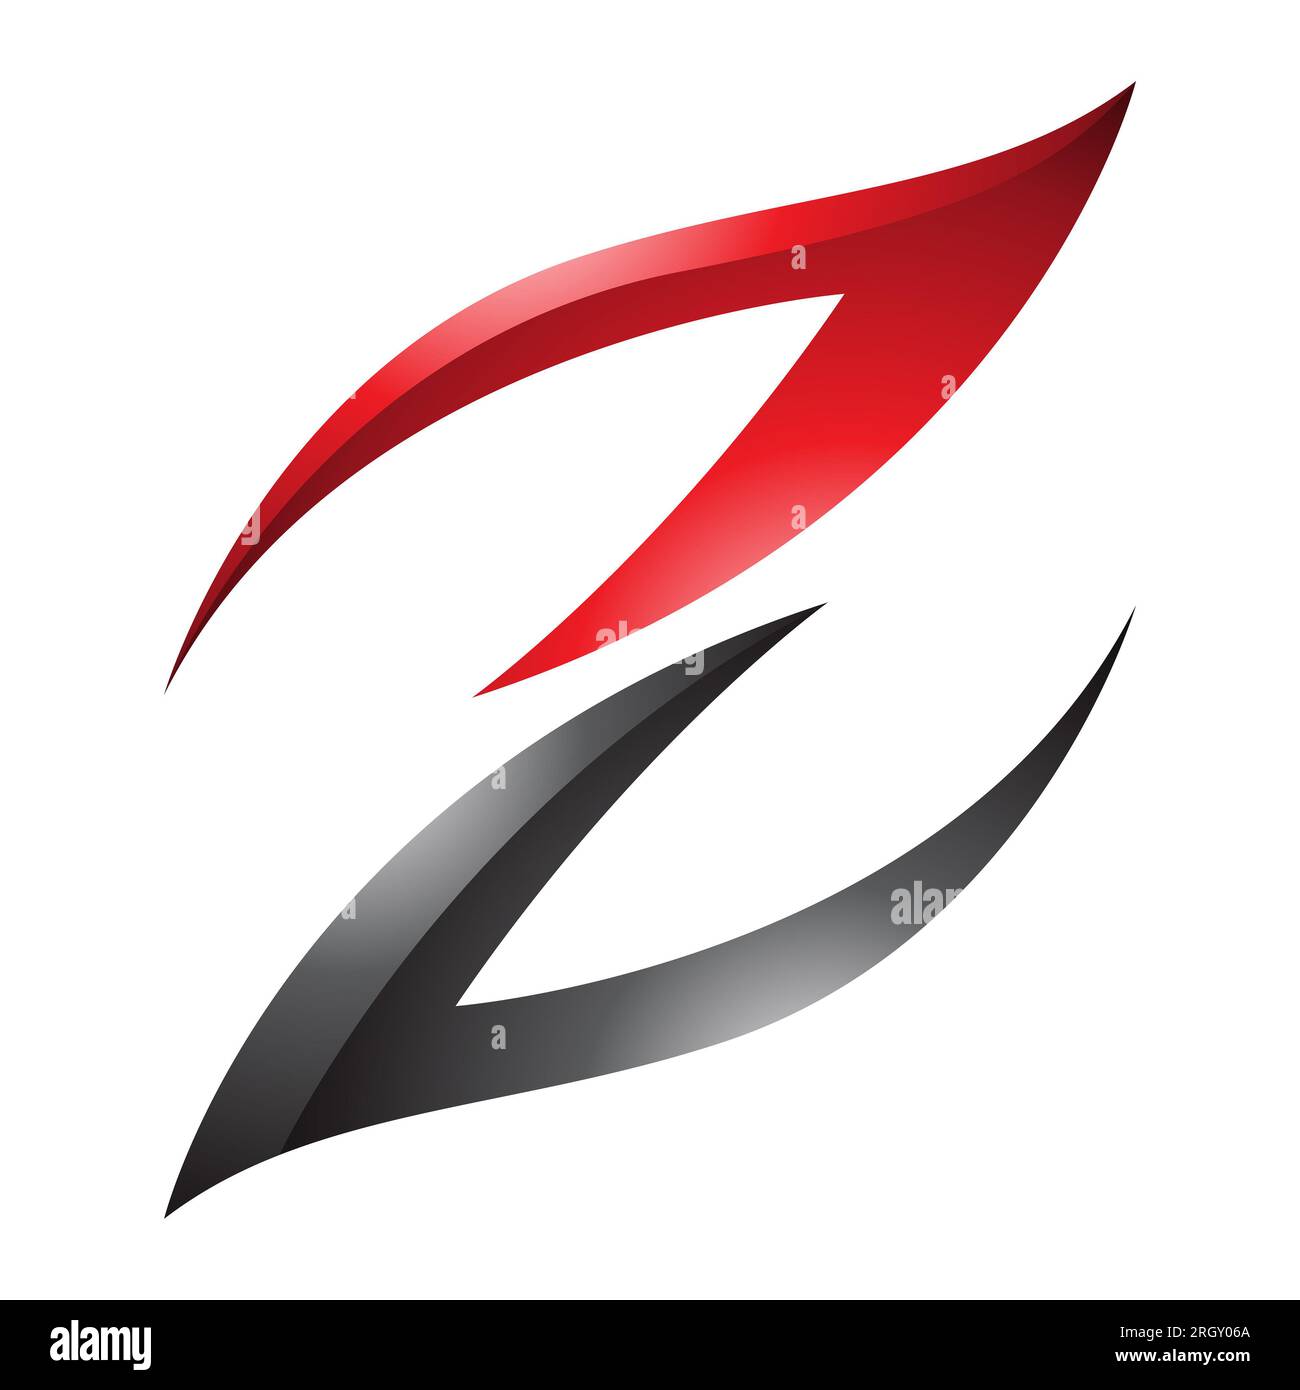 Red and Black Glossy Fire Shaped Letter Z Icon on a White Background Stock Photo